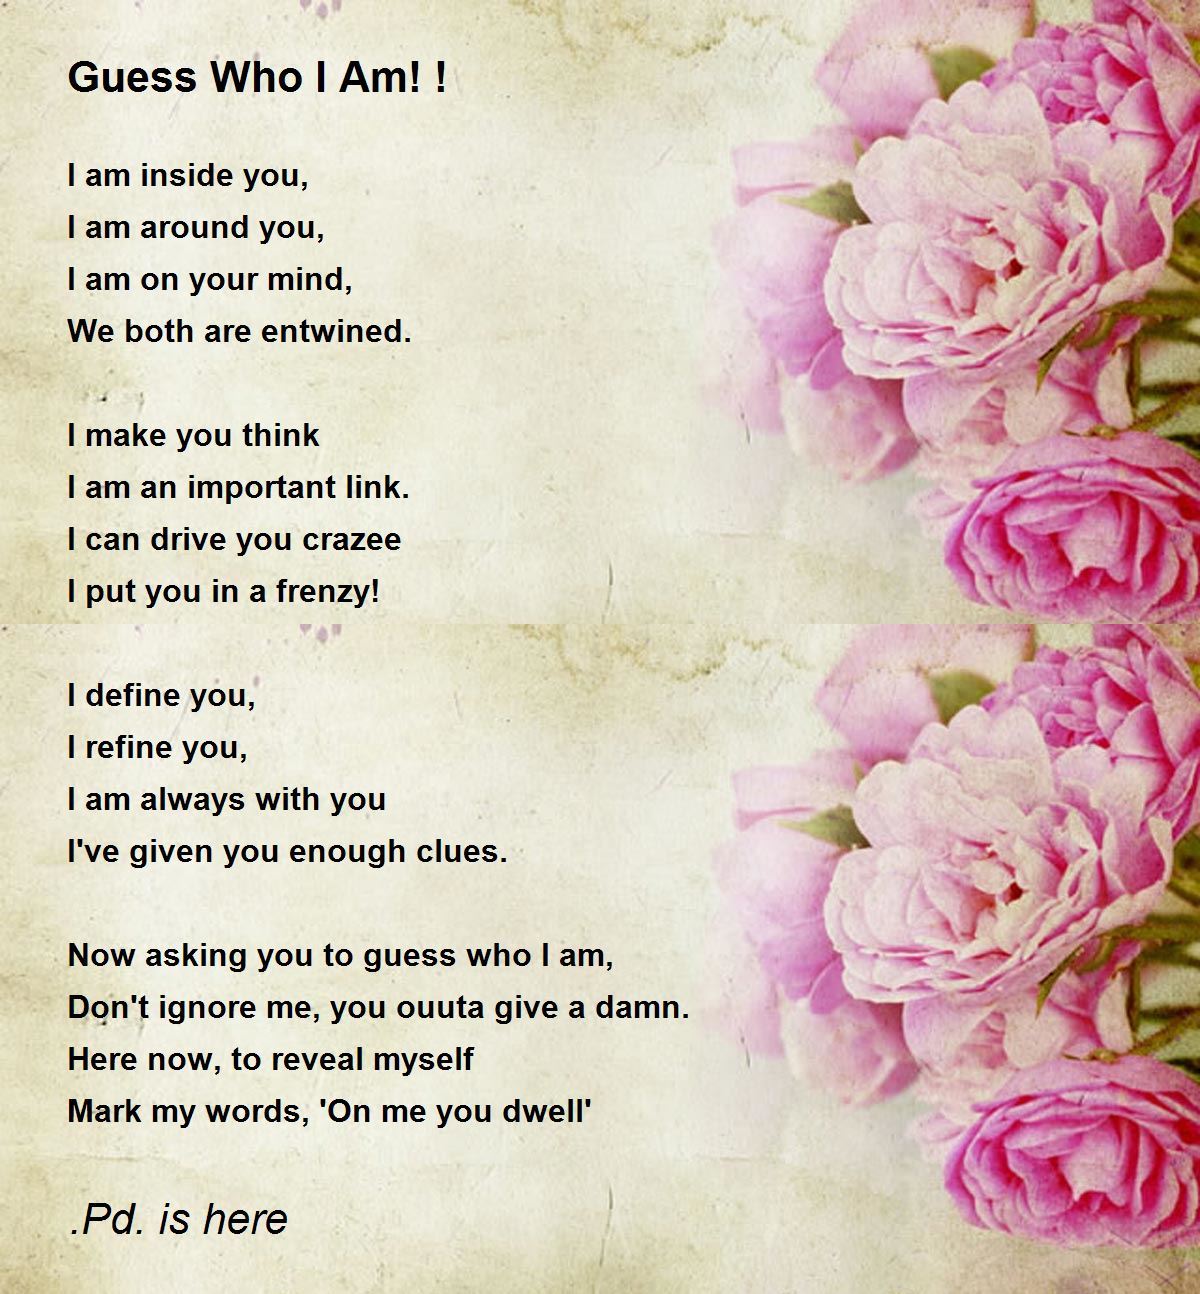 Guess Who I Am! ! by .Pd. is here - Guess Who I Am! !